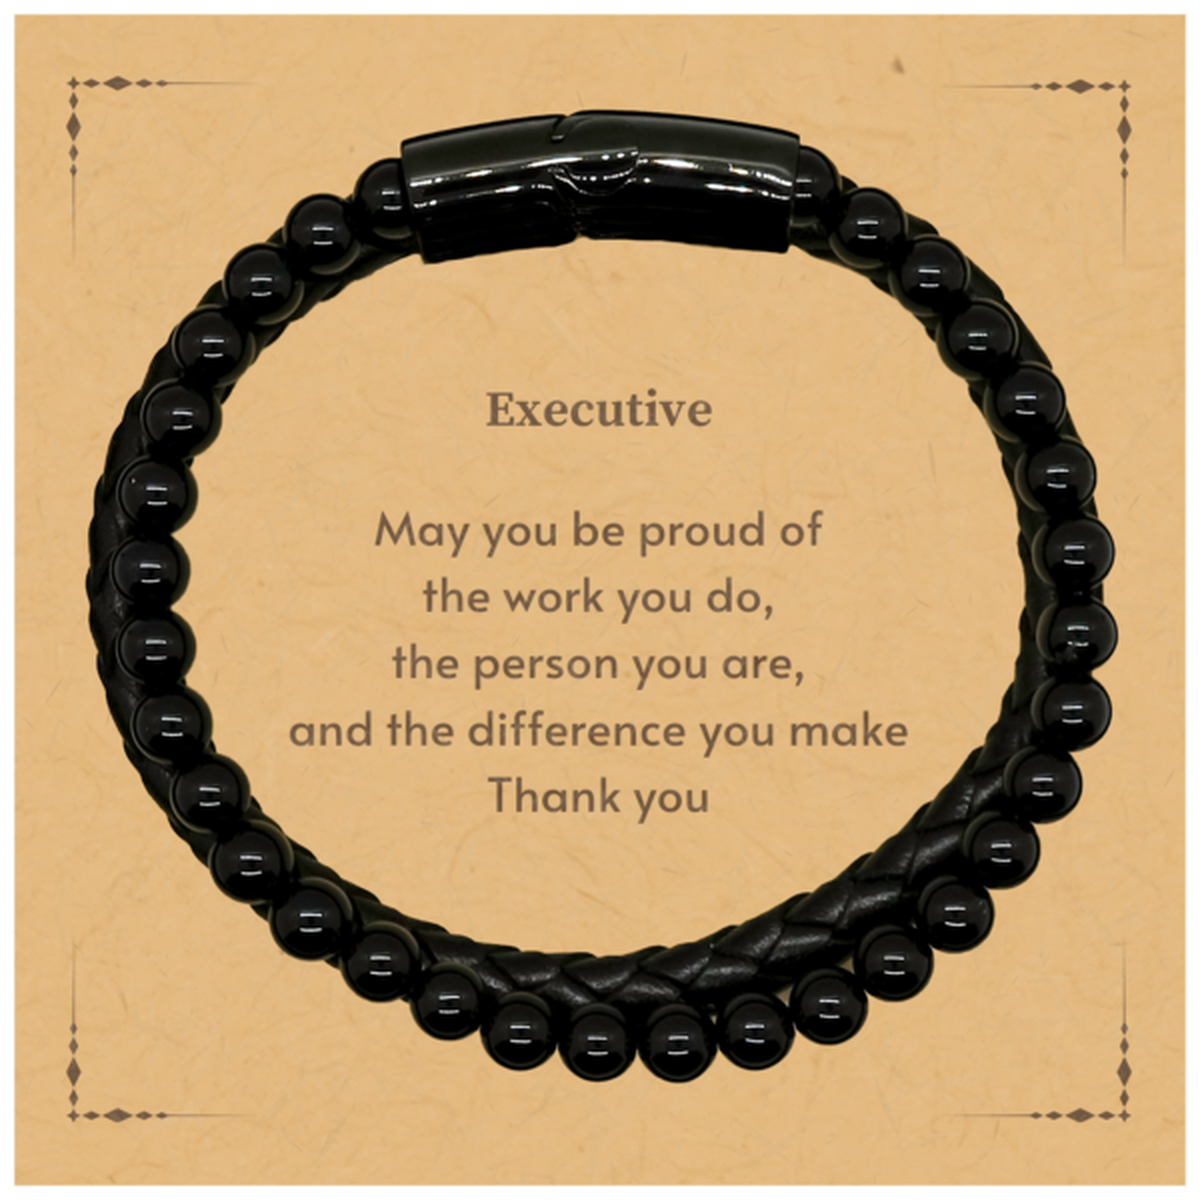 Heartwarming Stone Leather Bracelets Retirement Coworkers Gifts for Executive, Executive May You be proud of the work you do, the person you are Gifts for Boss Men Women Friends